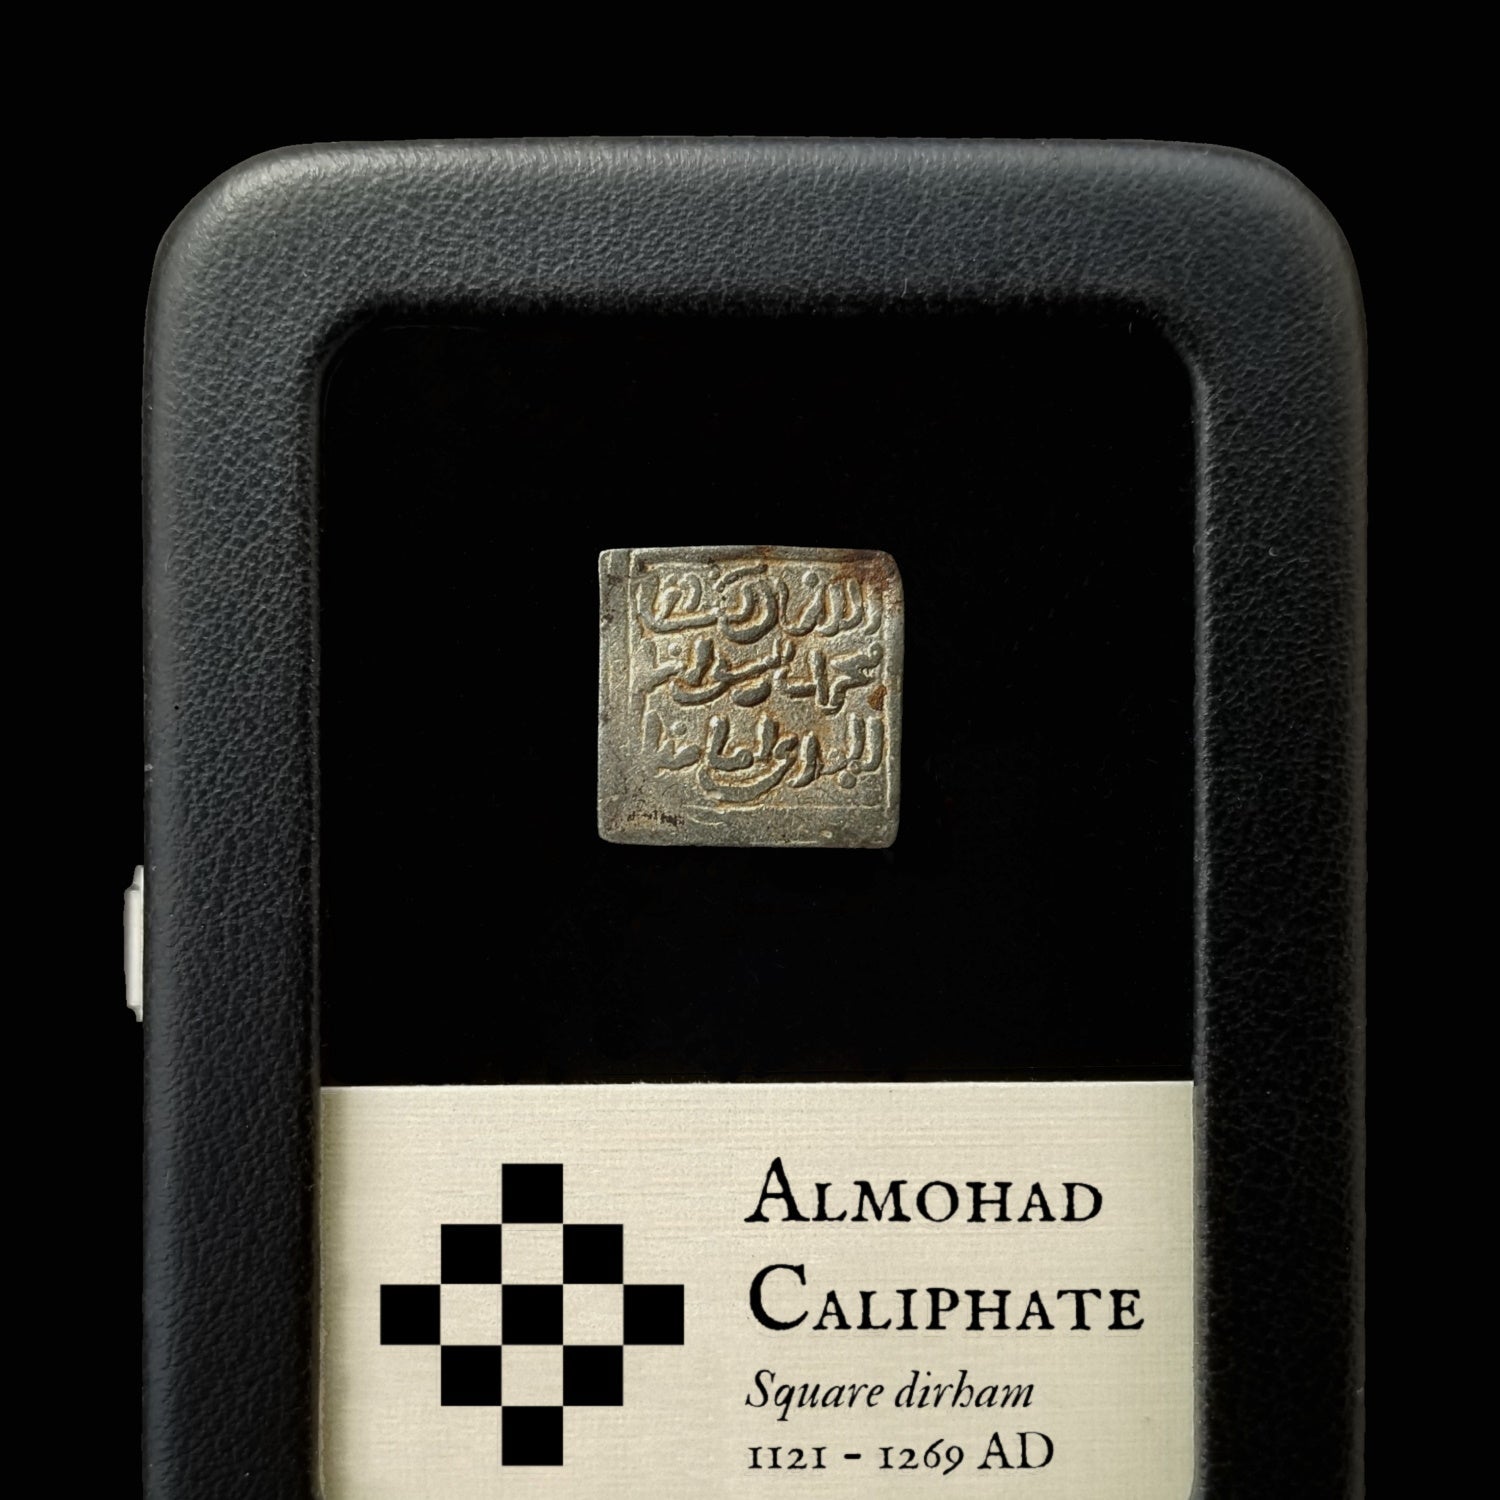 Almohad Caliphate Square Dirham - 1121 to 1269 CE - N. Africa & Spain